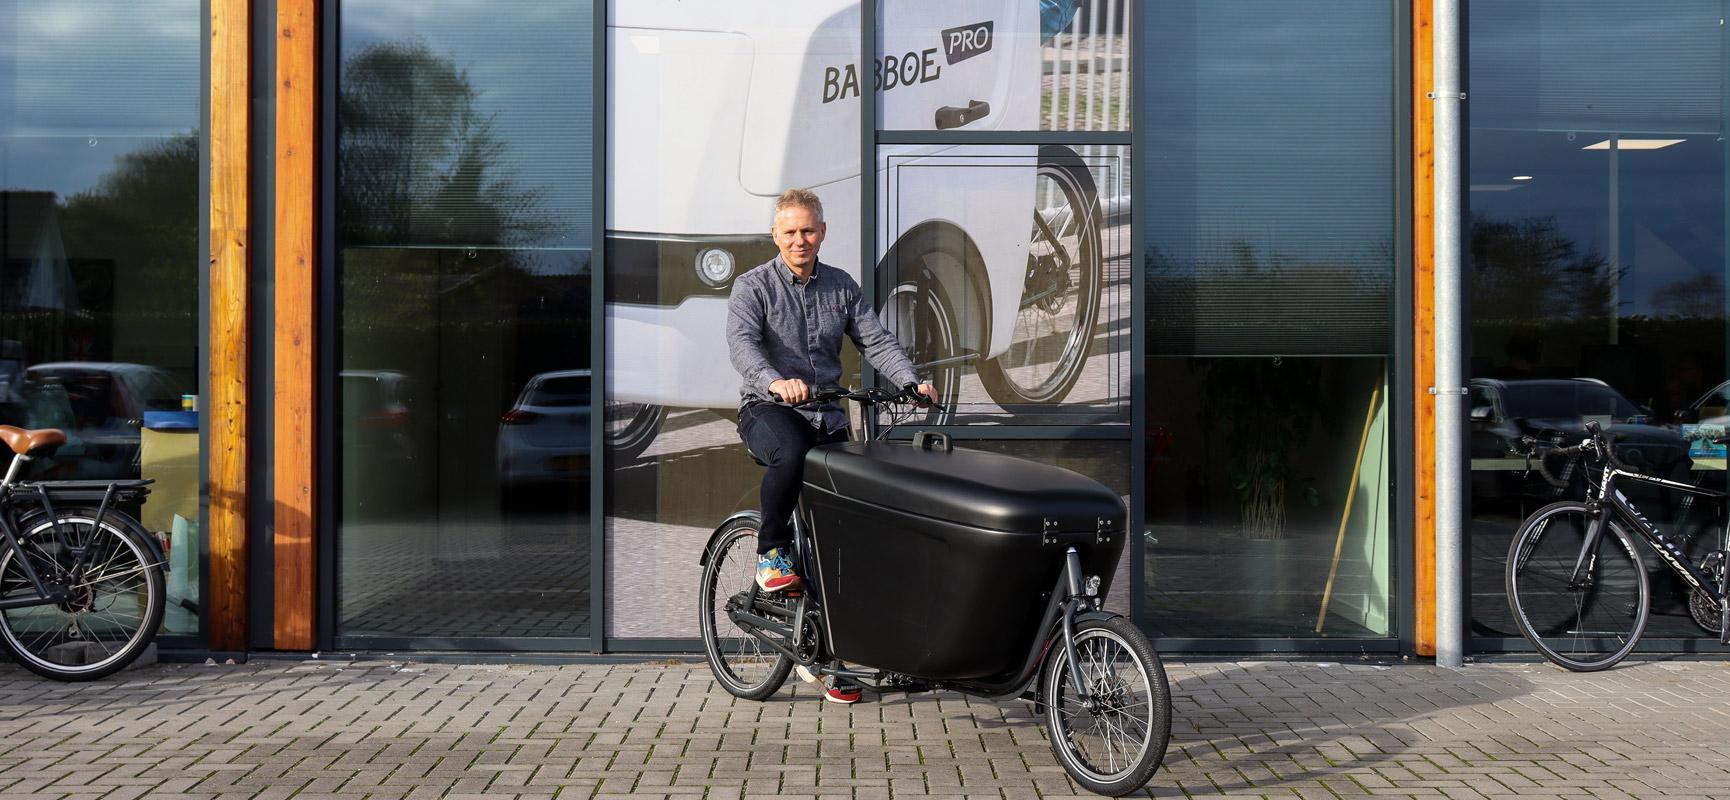 The origin and use of cargo delivery bikes - interview with Wim Leder of Babboe Pro